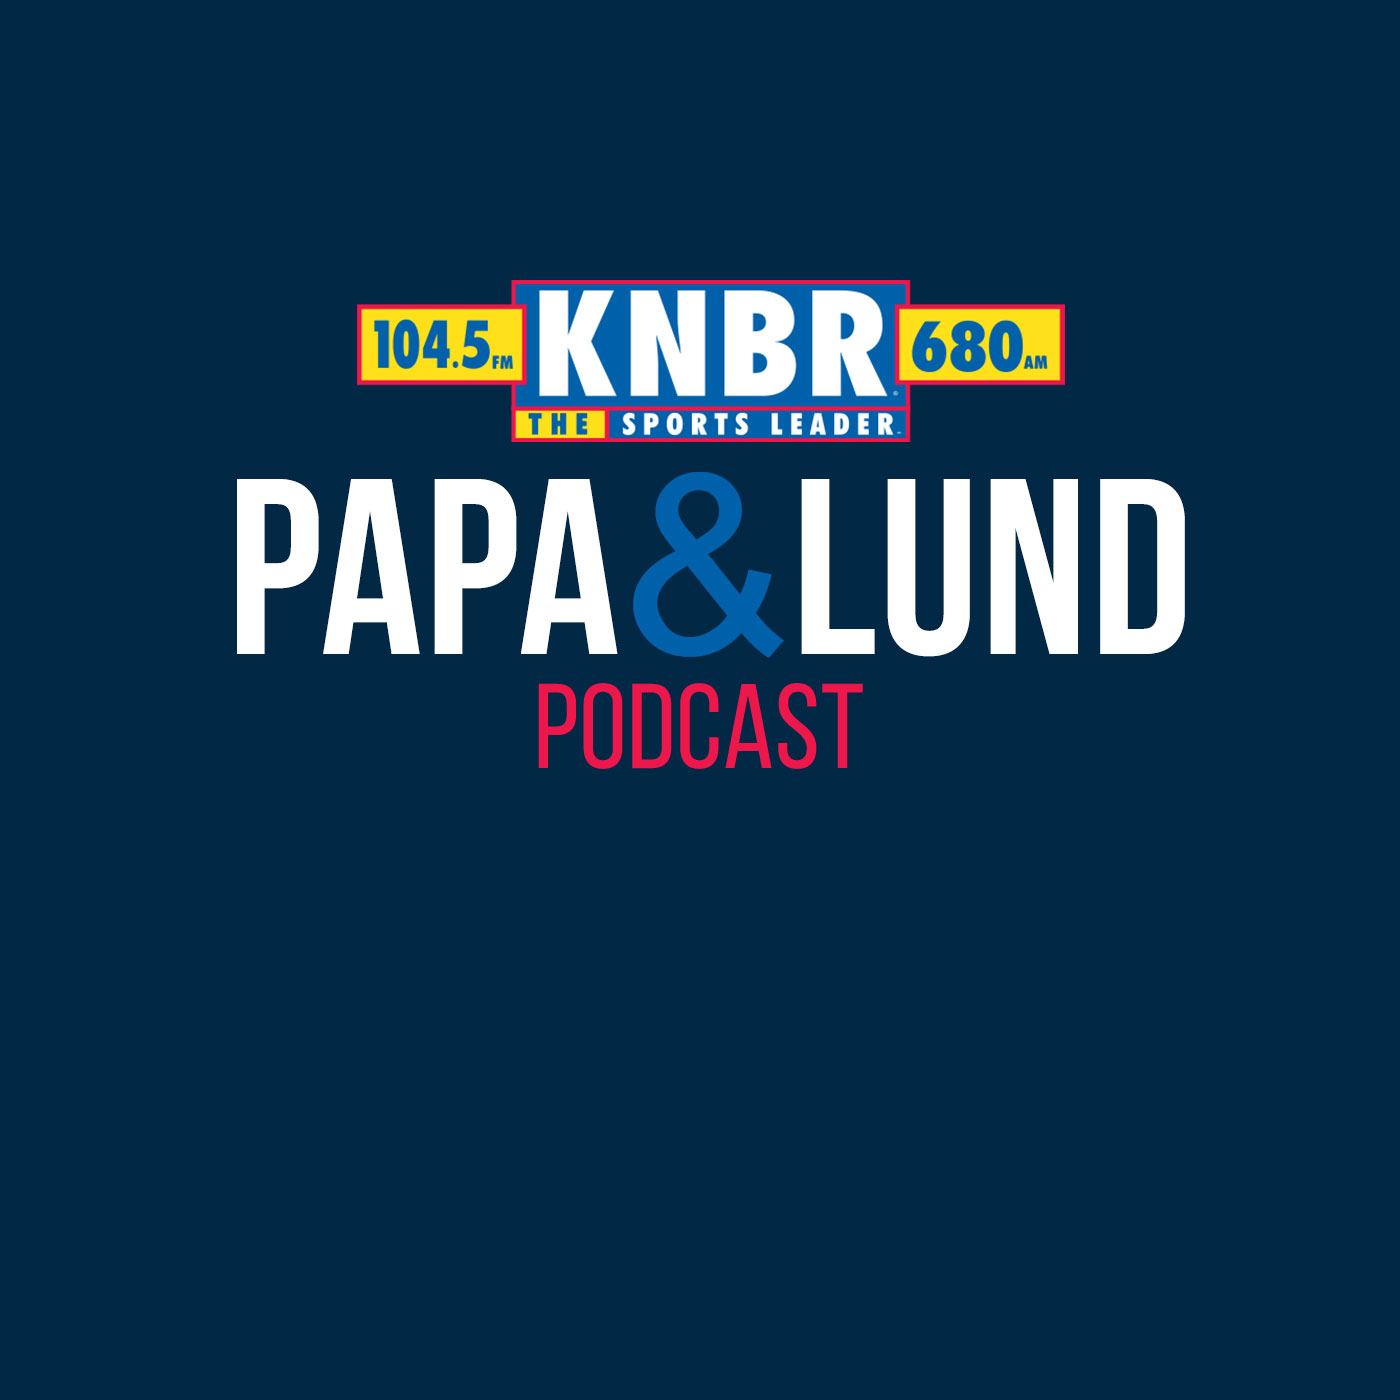 12-20 Monte Poole joins Papa & Lund to discuss the Warriors huge win against the Celtics and the emergence of Jonathan Kuminga